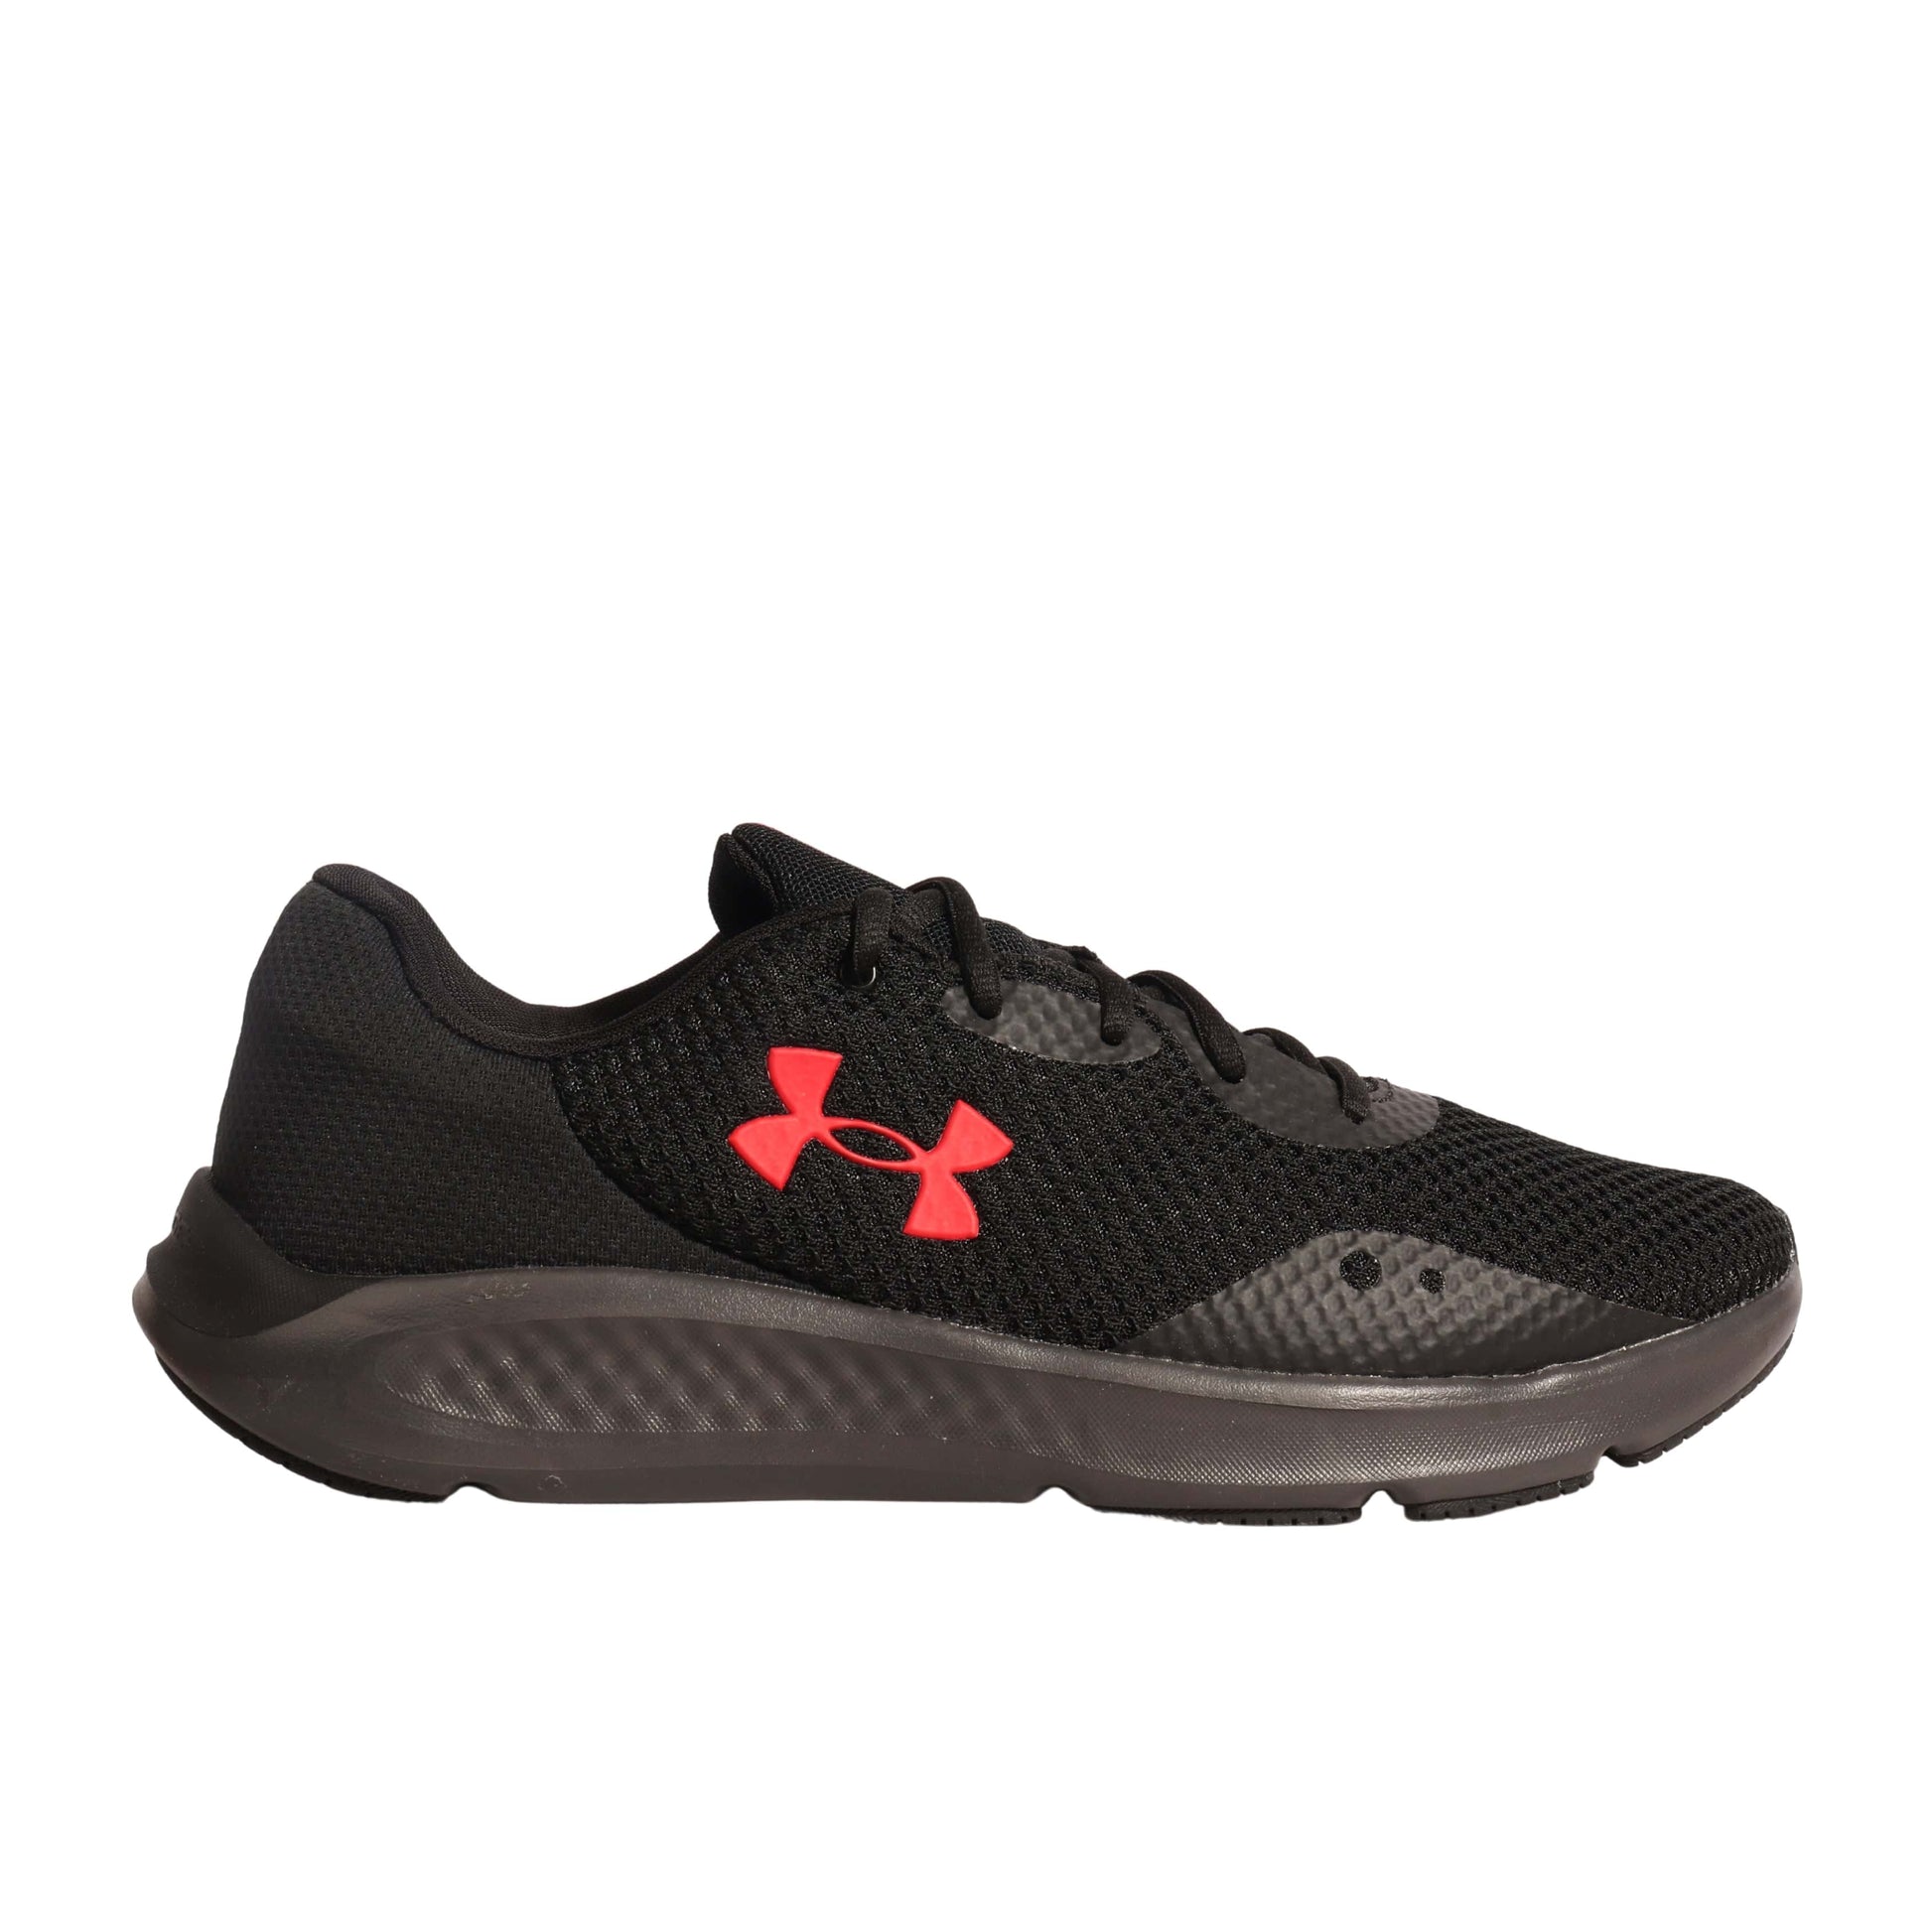 Under Armour Men's Charged Pursuit 3 --Running Shoe 